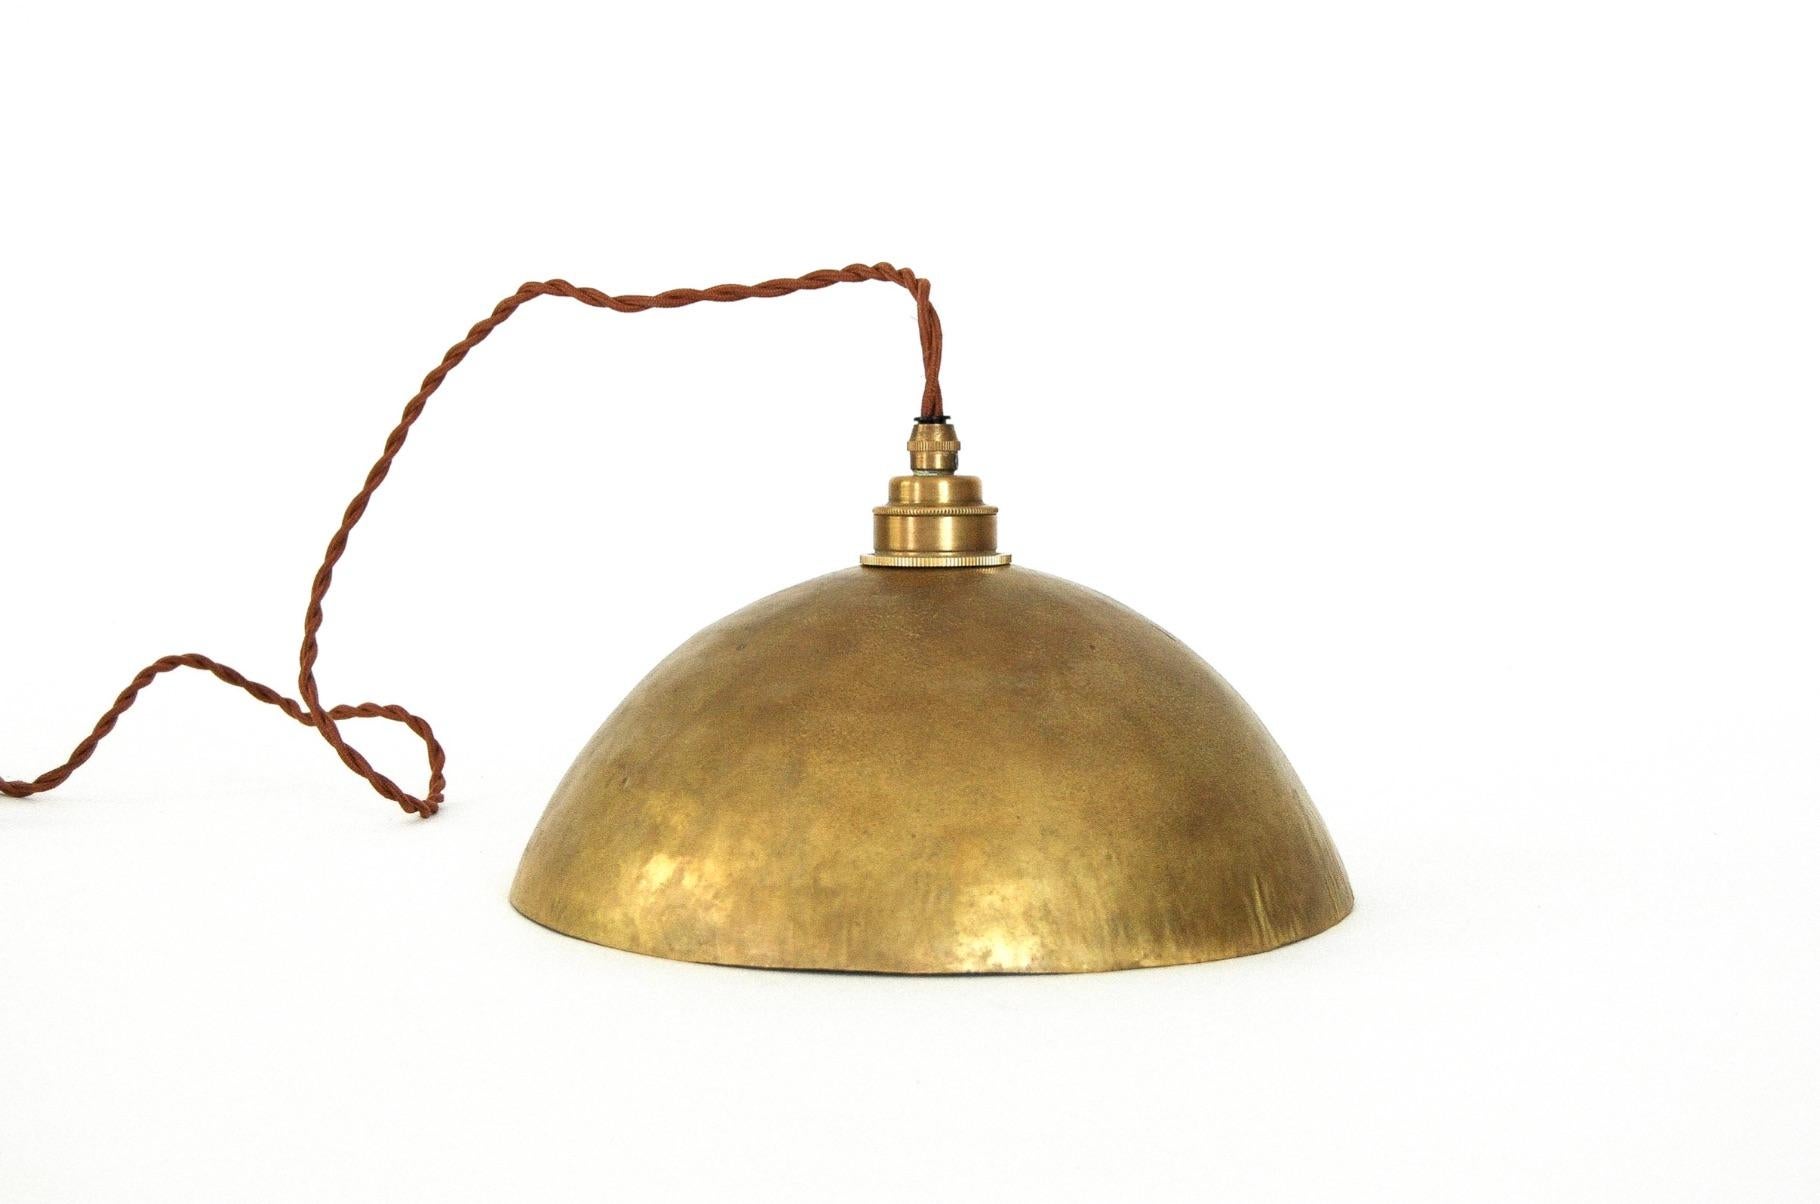 Brass dome pendant lamp with brass socket and braided 12’ cord.  Takes one standard lightbulb.
This beautifully simple hand-forged brass pendant lamp includes a brass socket and an elevated, retro style braided cord that can either come with a plug,